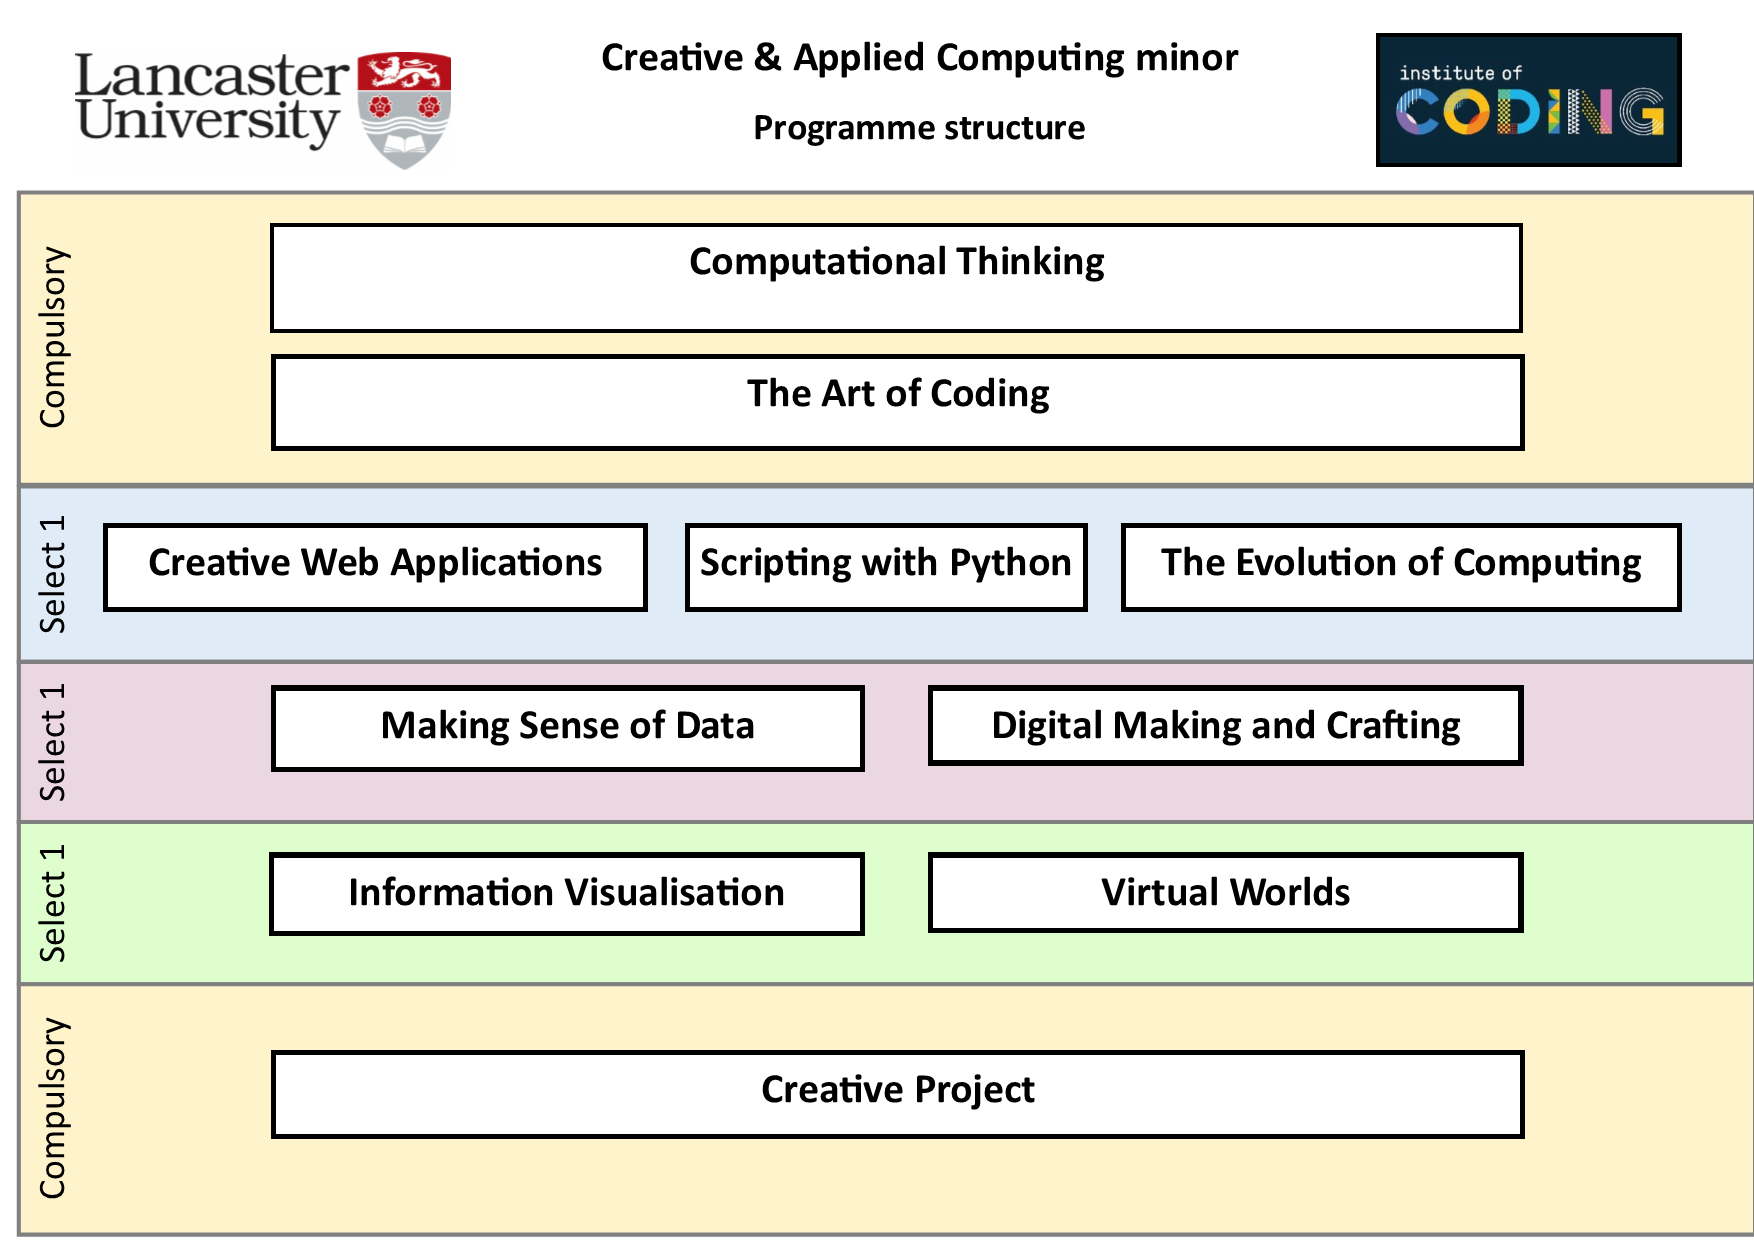 creative and applied computing minor programme structure